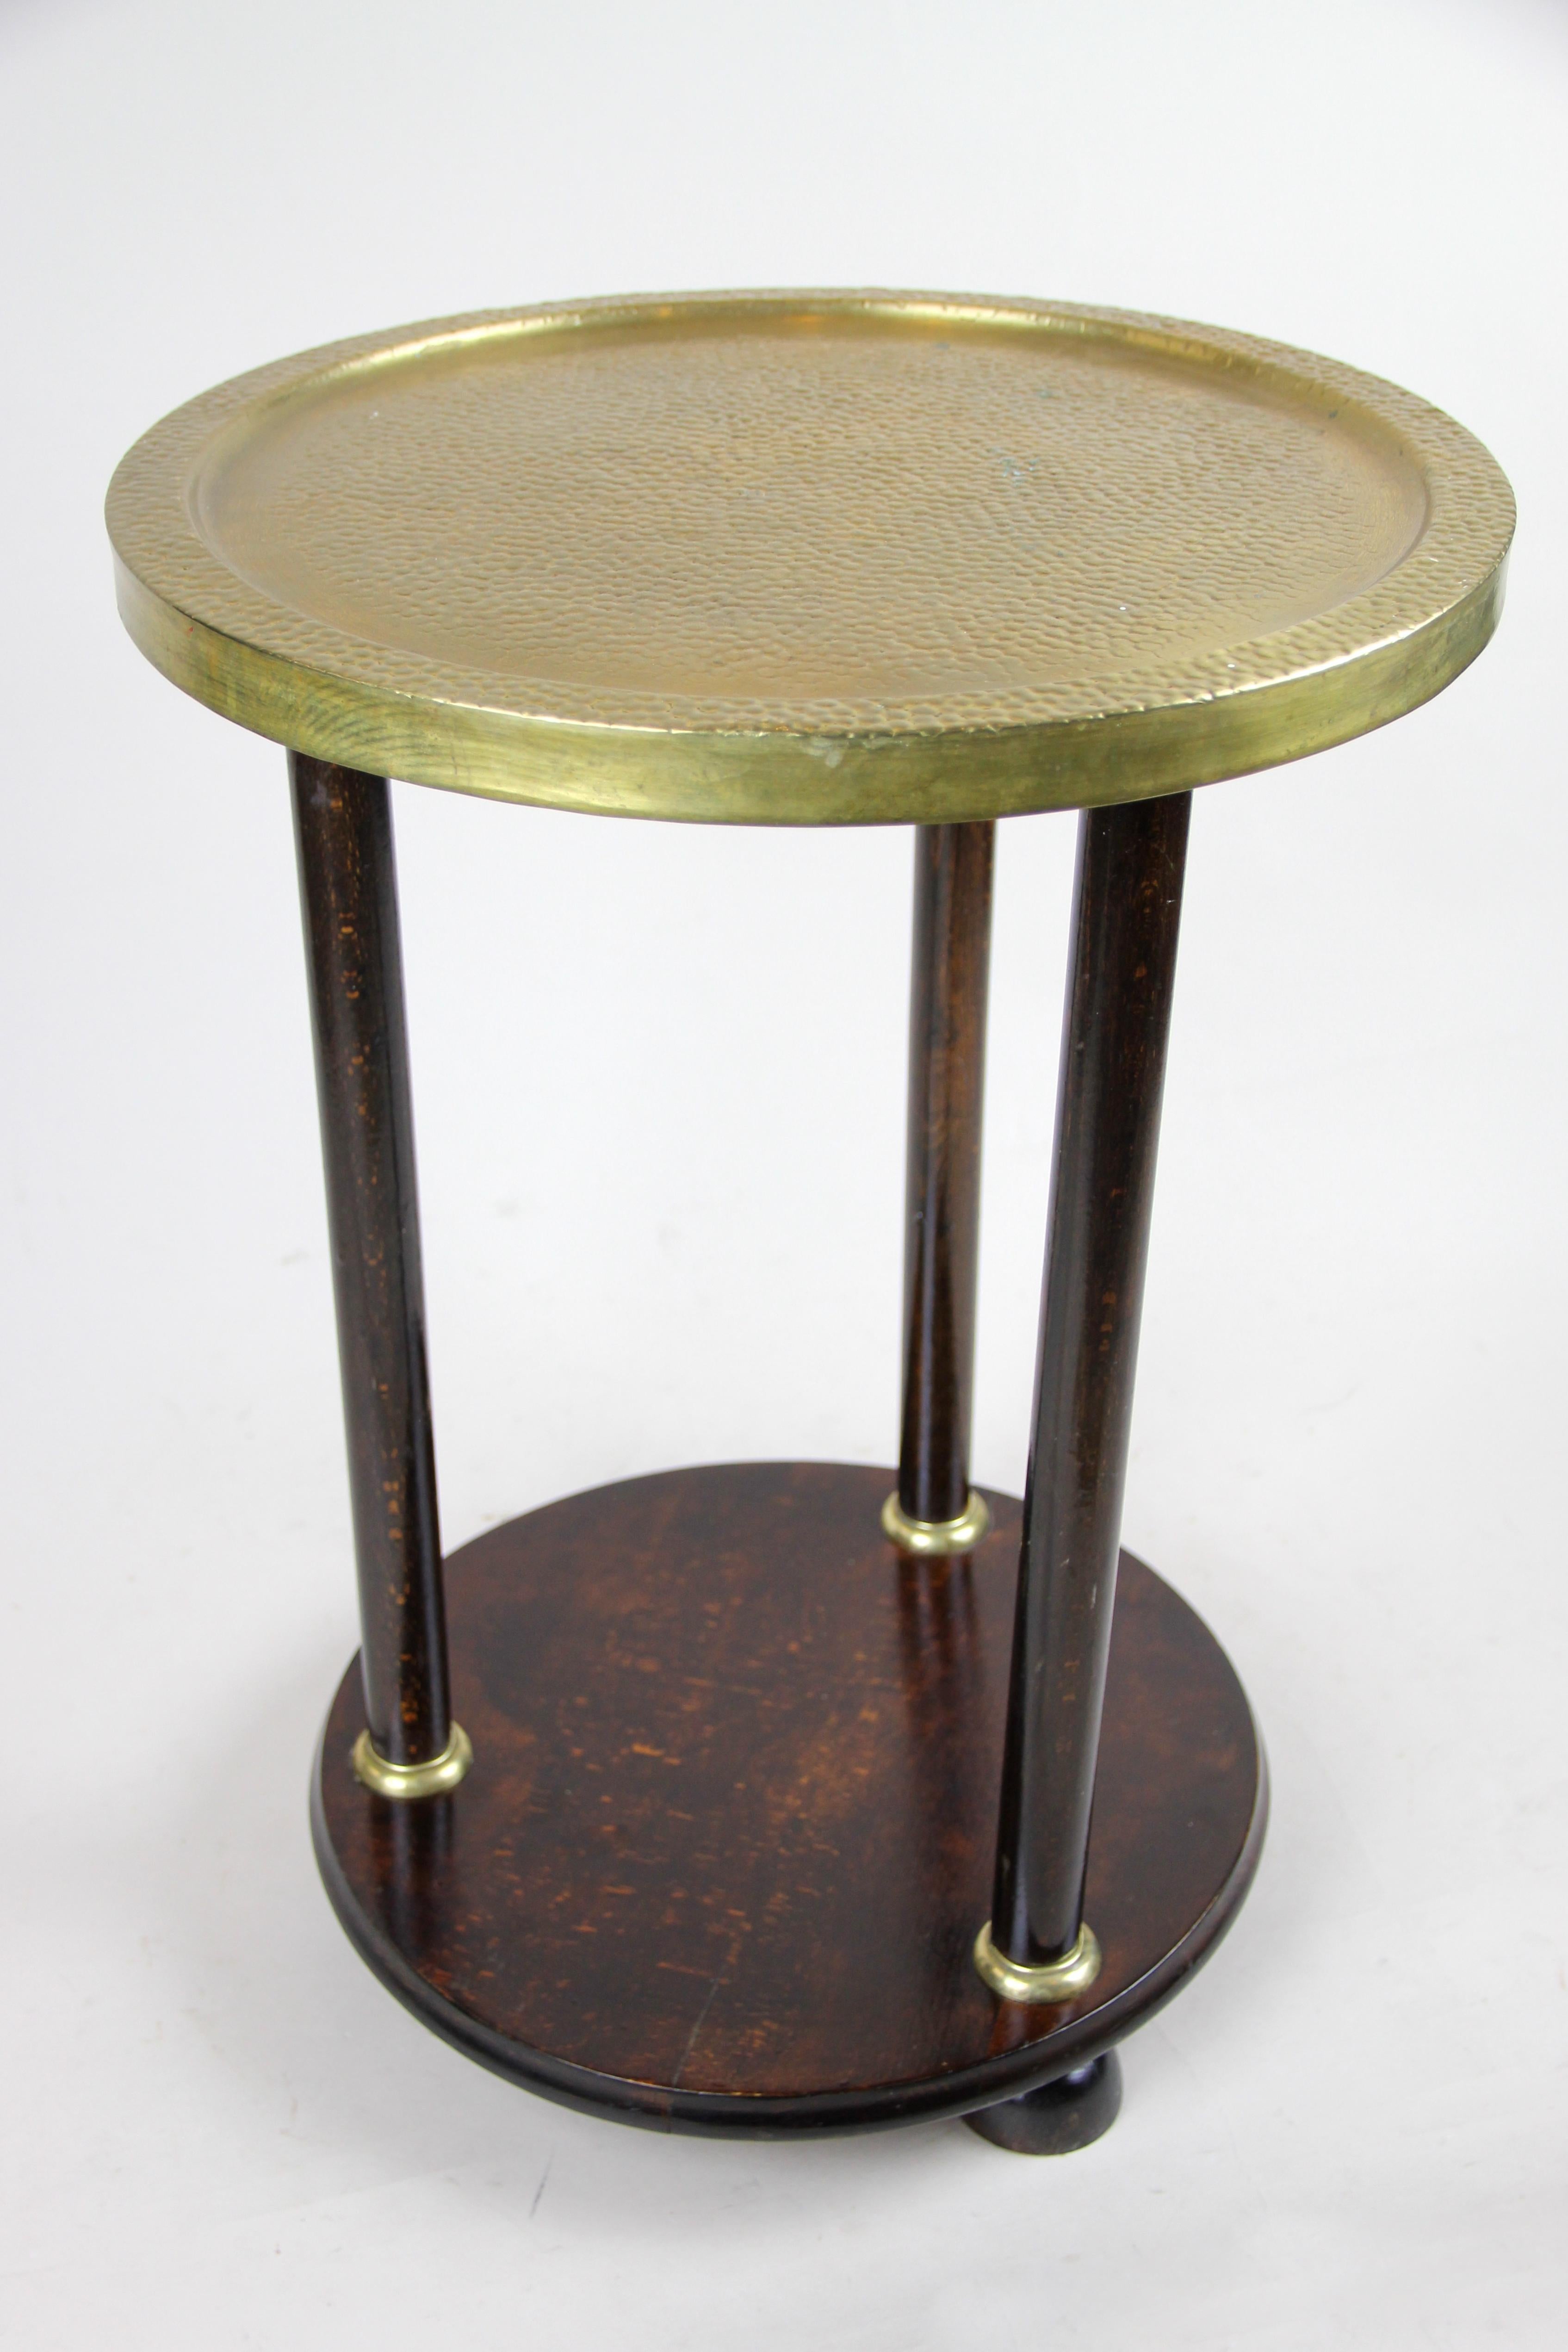 Faceted Gueridon Side Table with Brass Table Top Attributed to Kohn, Austria, circa 1910